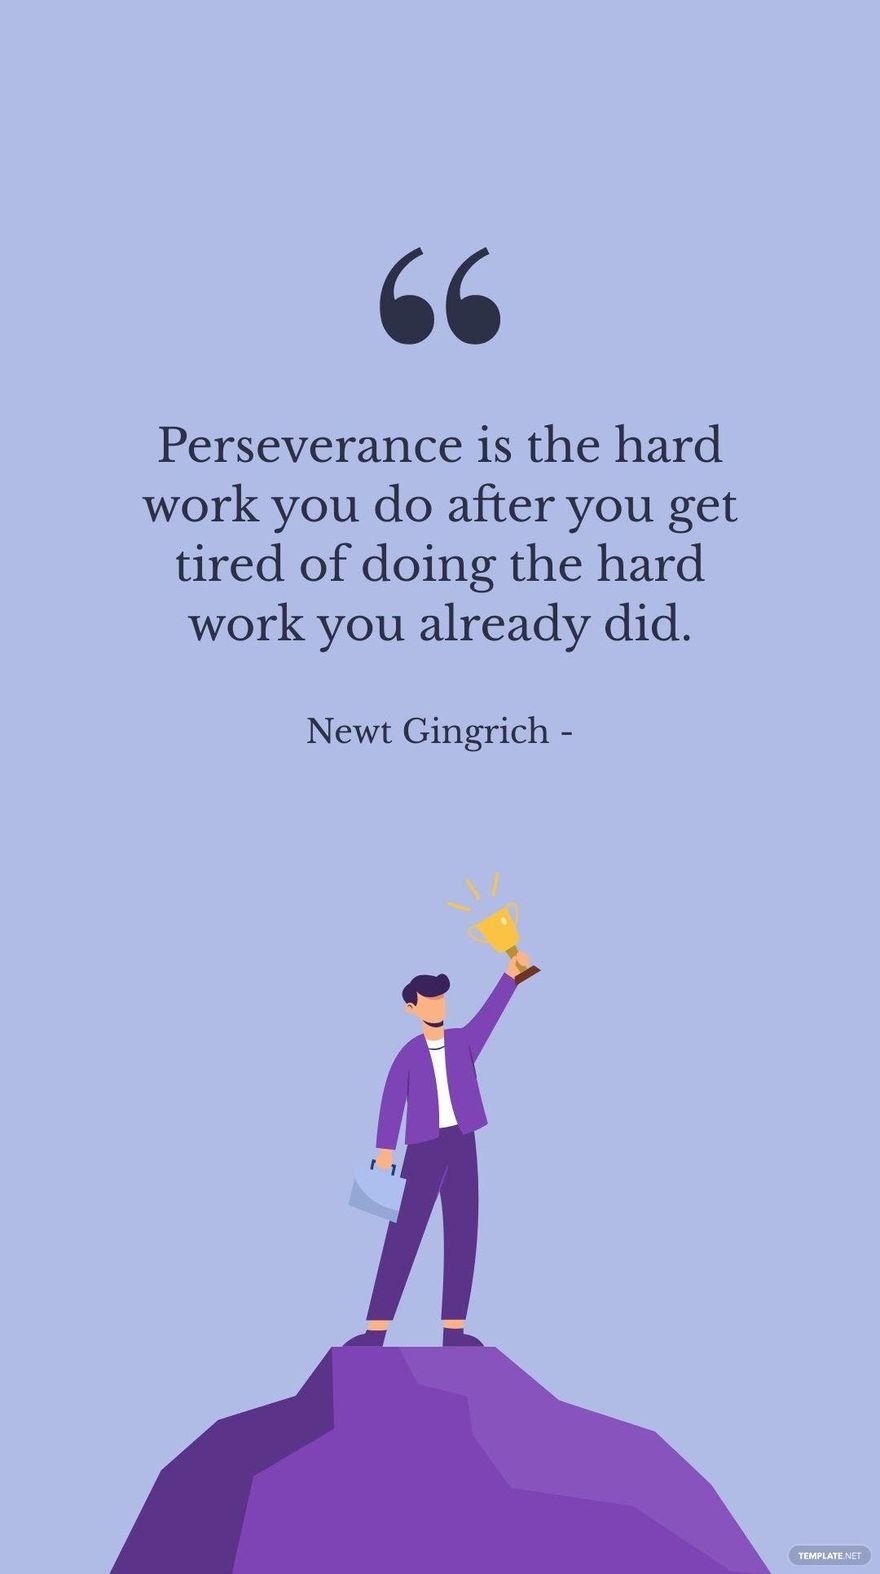 Newt Gingrich - Perseverance is the hard work you do after you get tired of doing the hard work you already did.